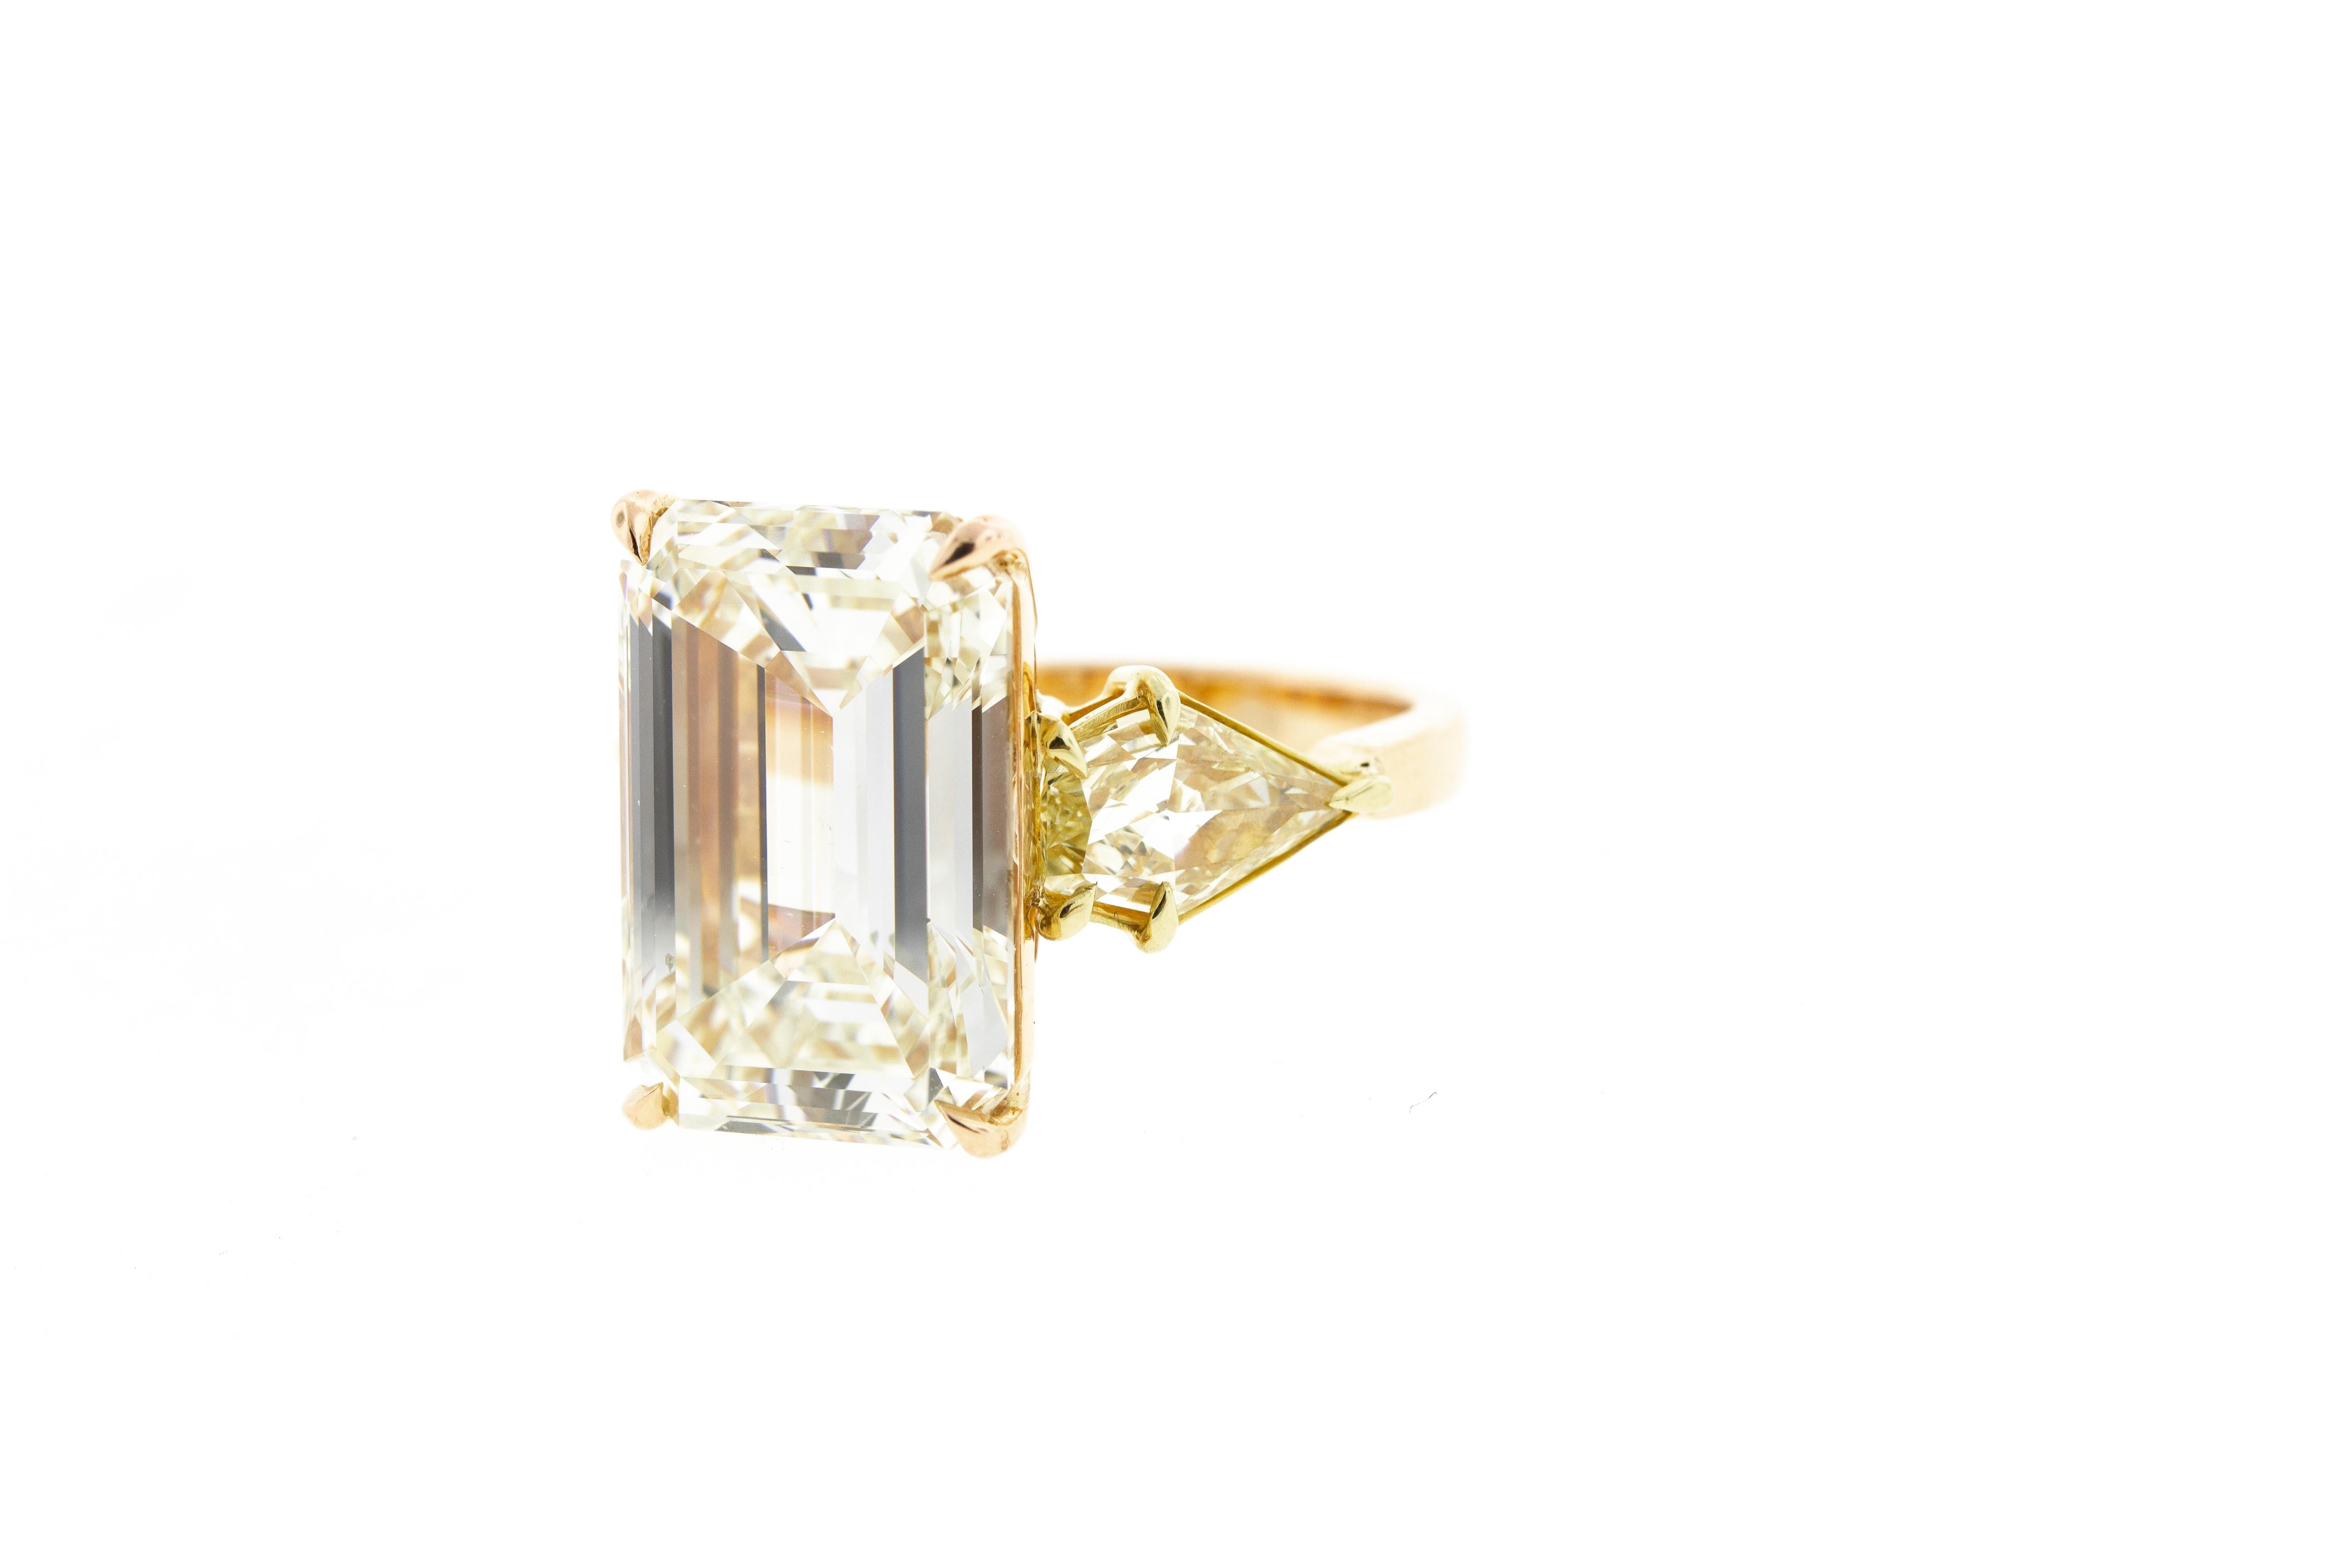 This vintage diamond ring features a 10 carat emerald cut center stone with a pair of fancy yellow kite cut side stones for a total carat weight of 11.37 and is set in two tone gold (rose and yellow) with delicate detailing under the basket.